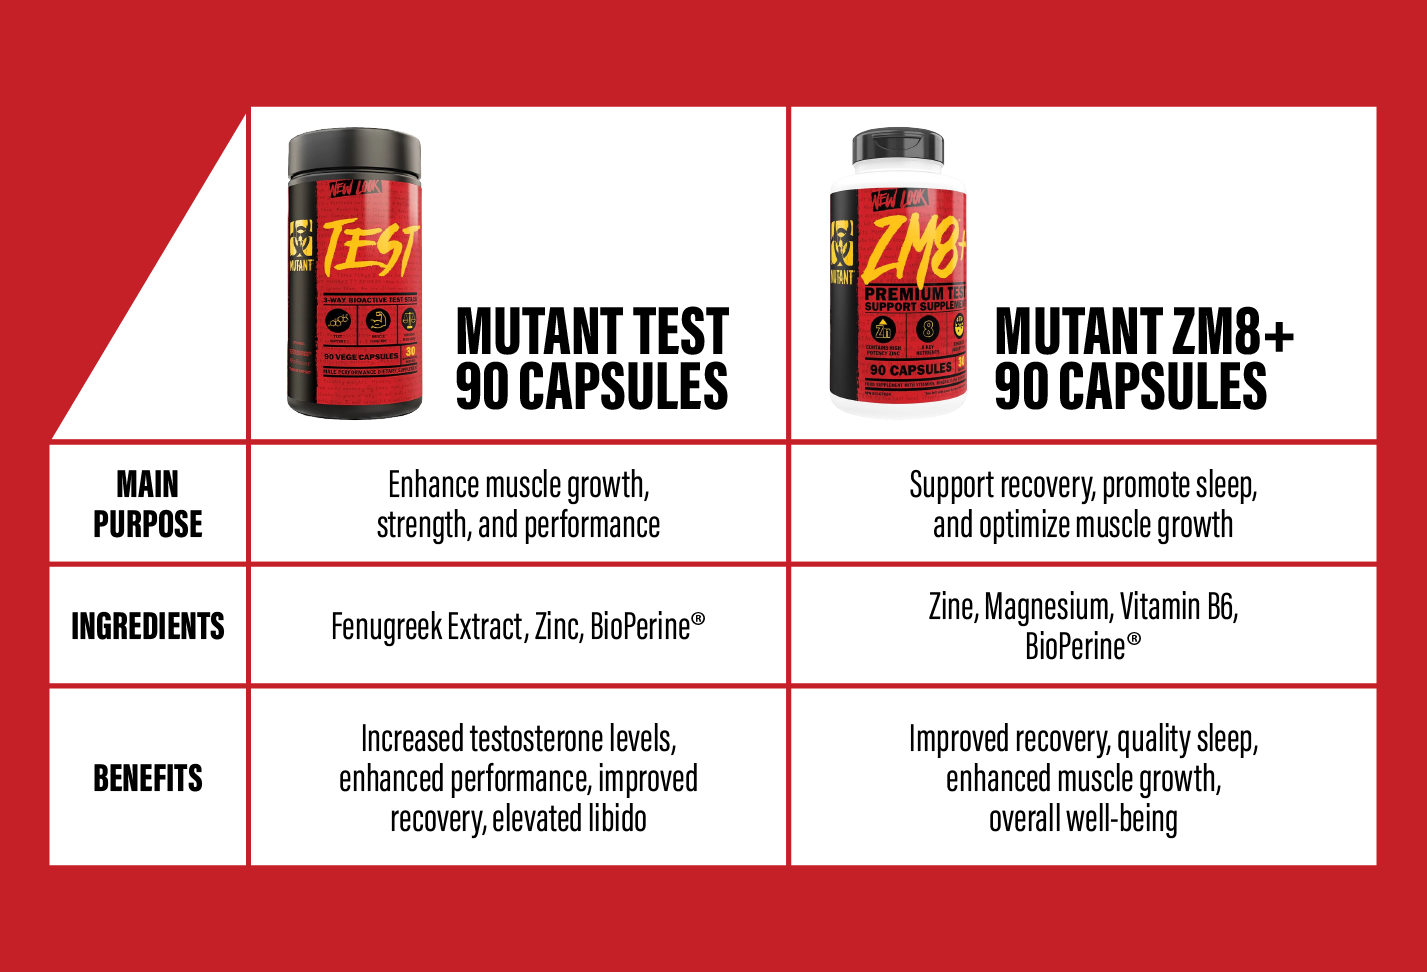 Compare Mutant Test and Mutant ZM8+: Which is Right for You